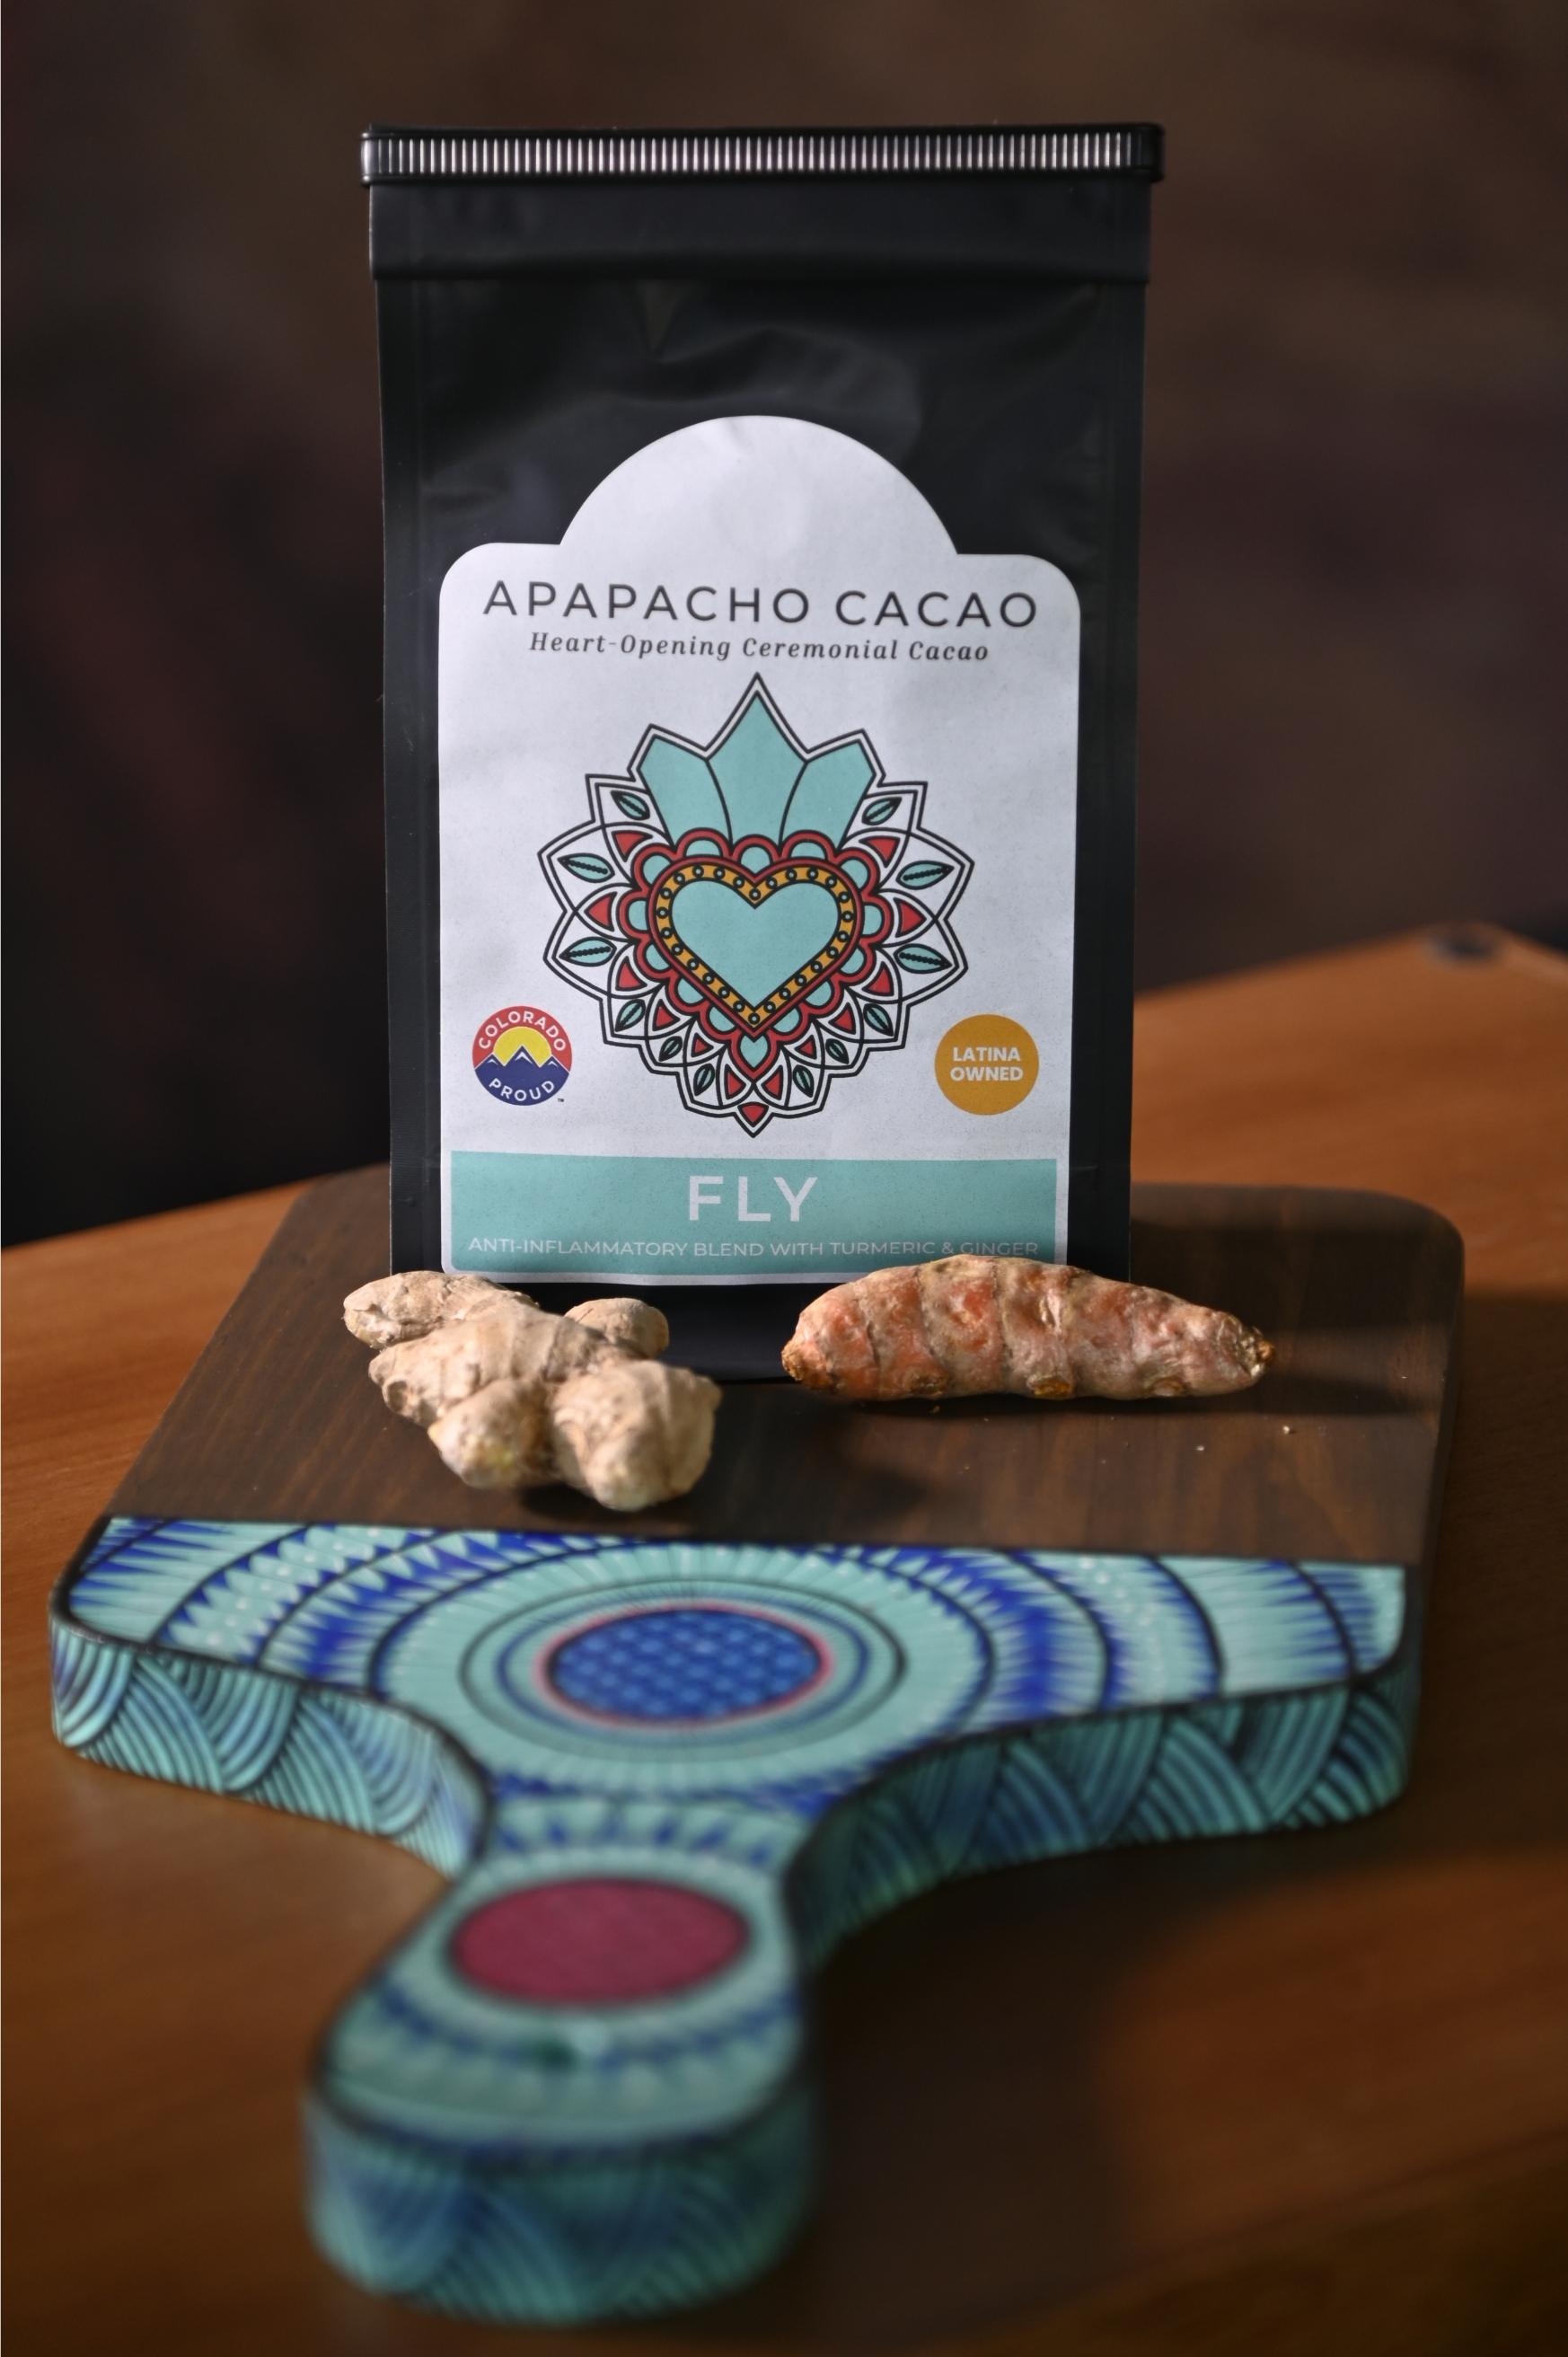 Apapacho Cacao "Fly" blend with turmeric and ginger